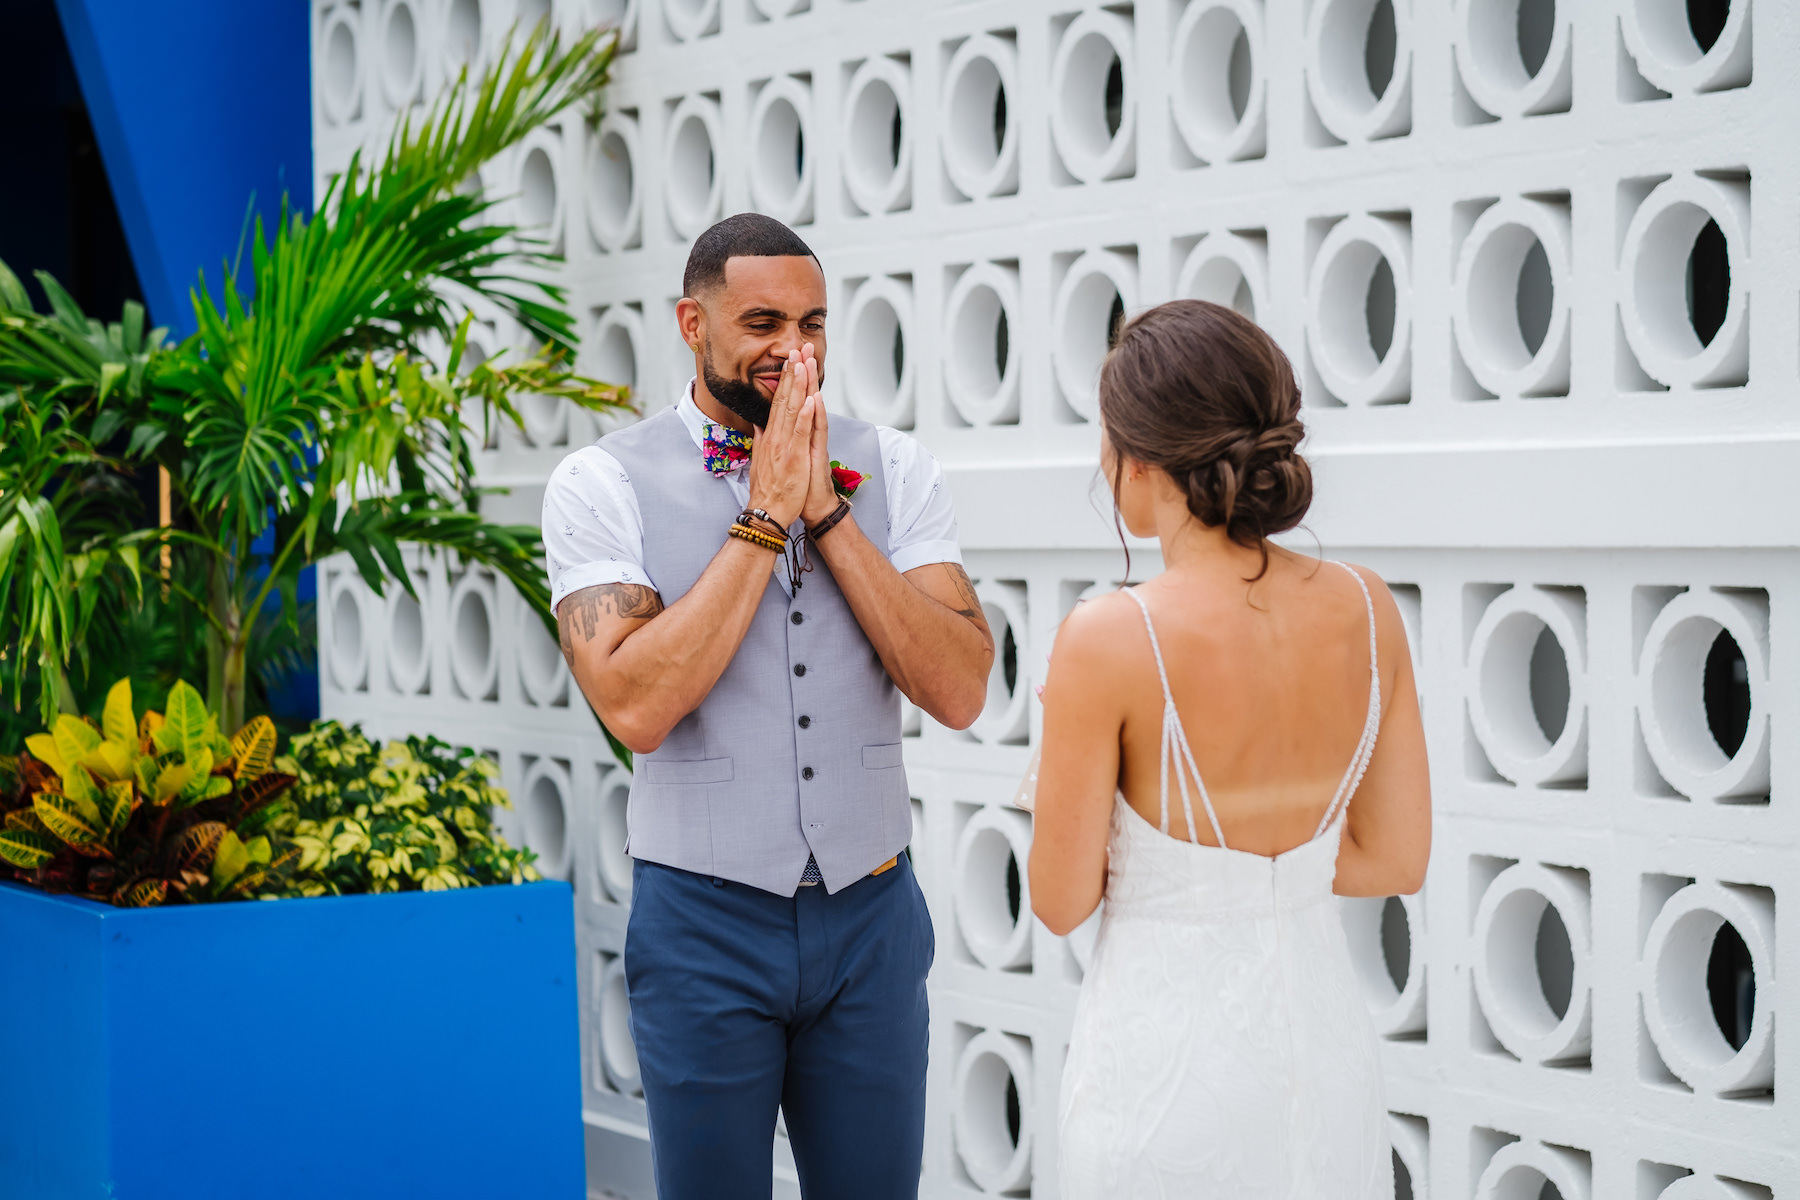 Tropical Florida Bride and Groom Intimate Emotional First Look Wedding Portrait, Groom in Grey Vest and Blue Pant Suit, Short Sleeve White Shirt and Floral Bowtie